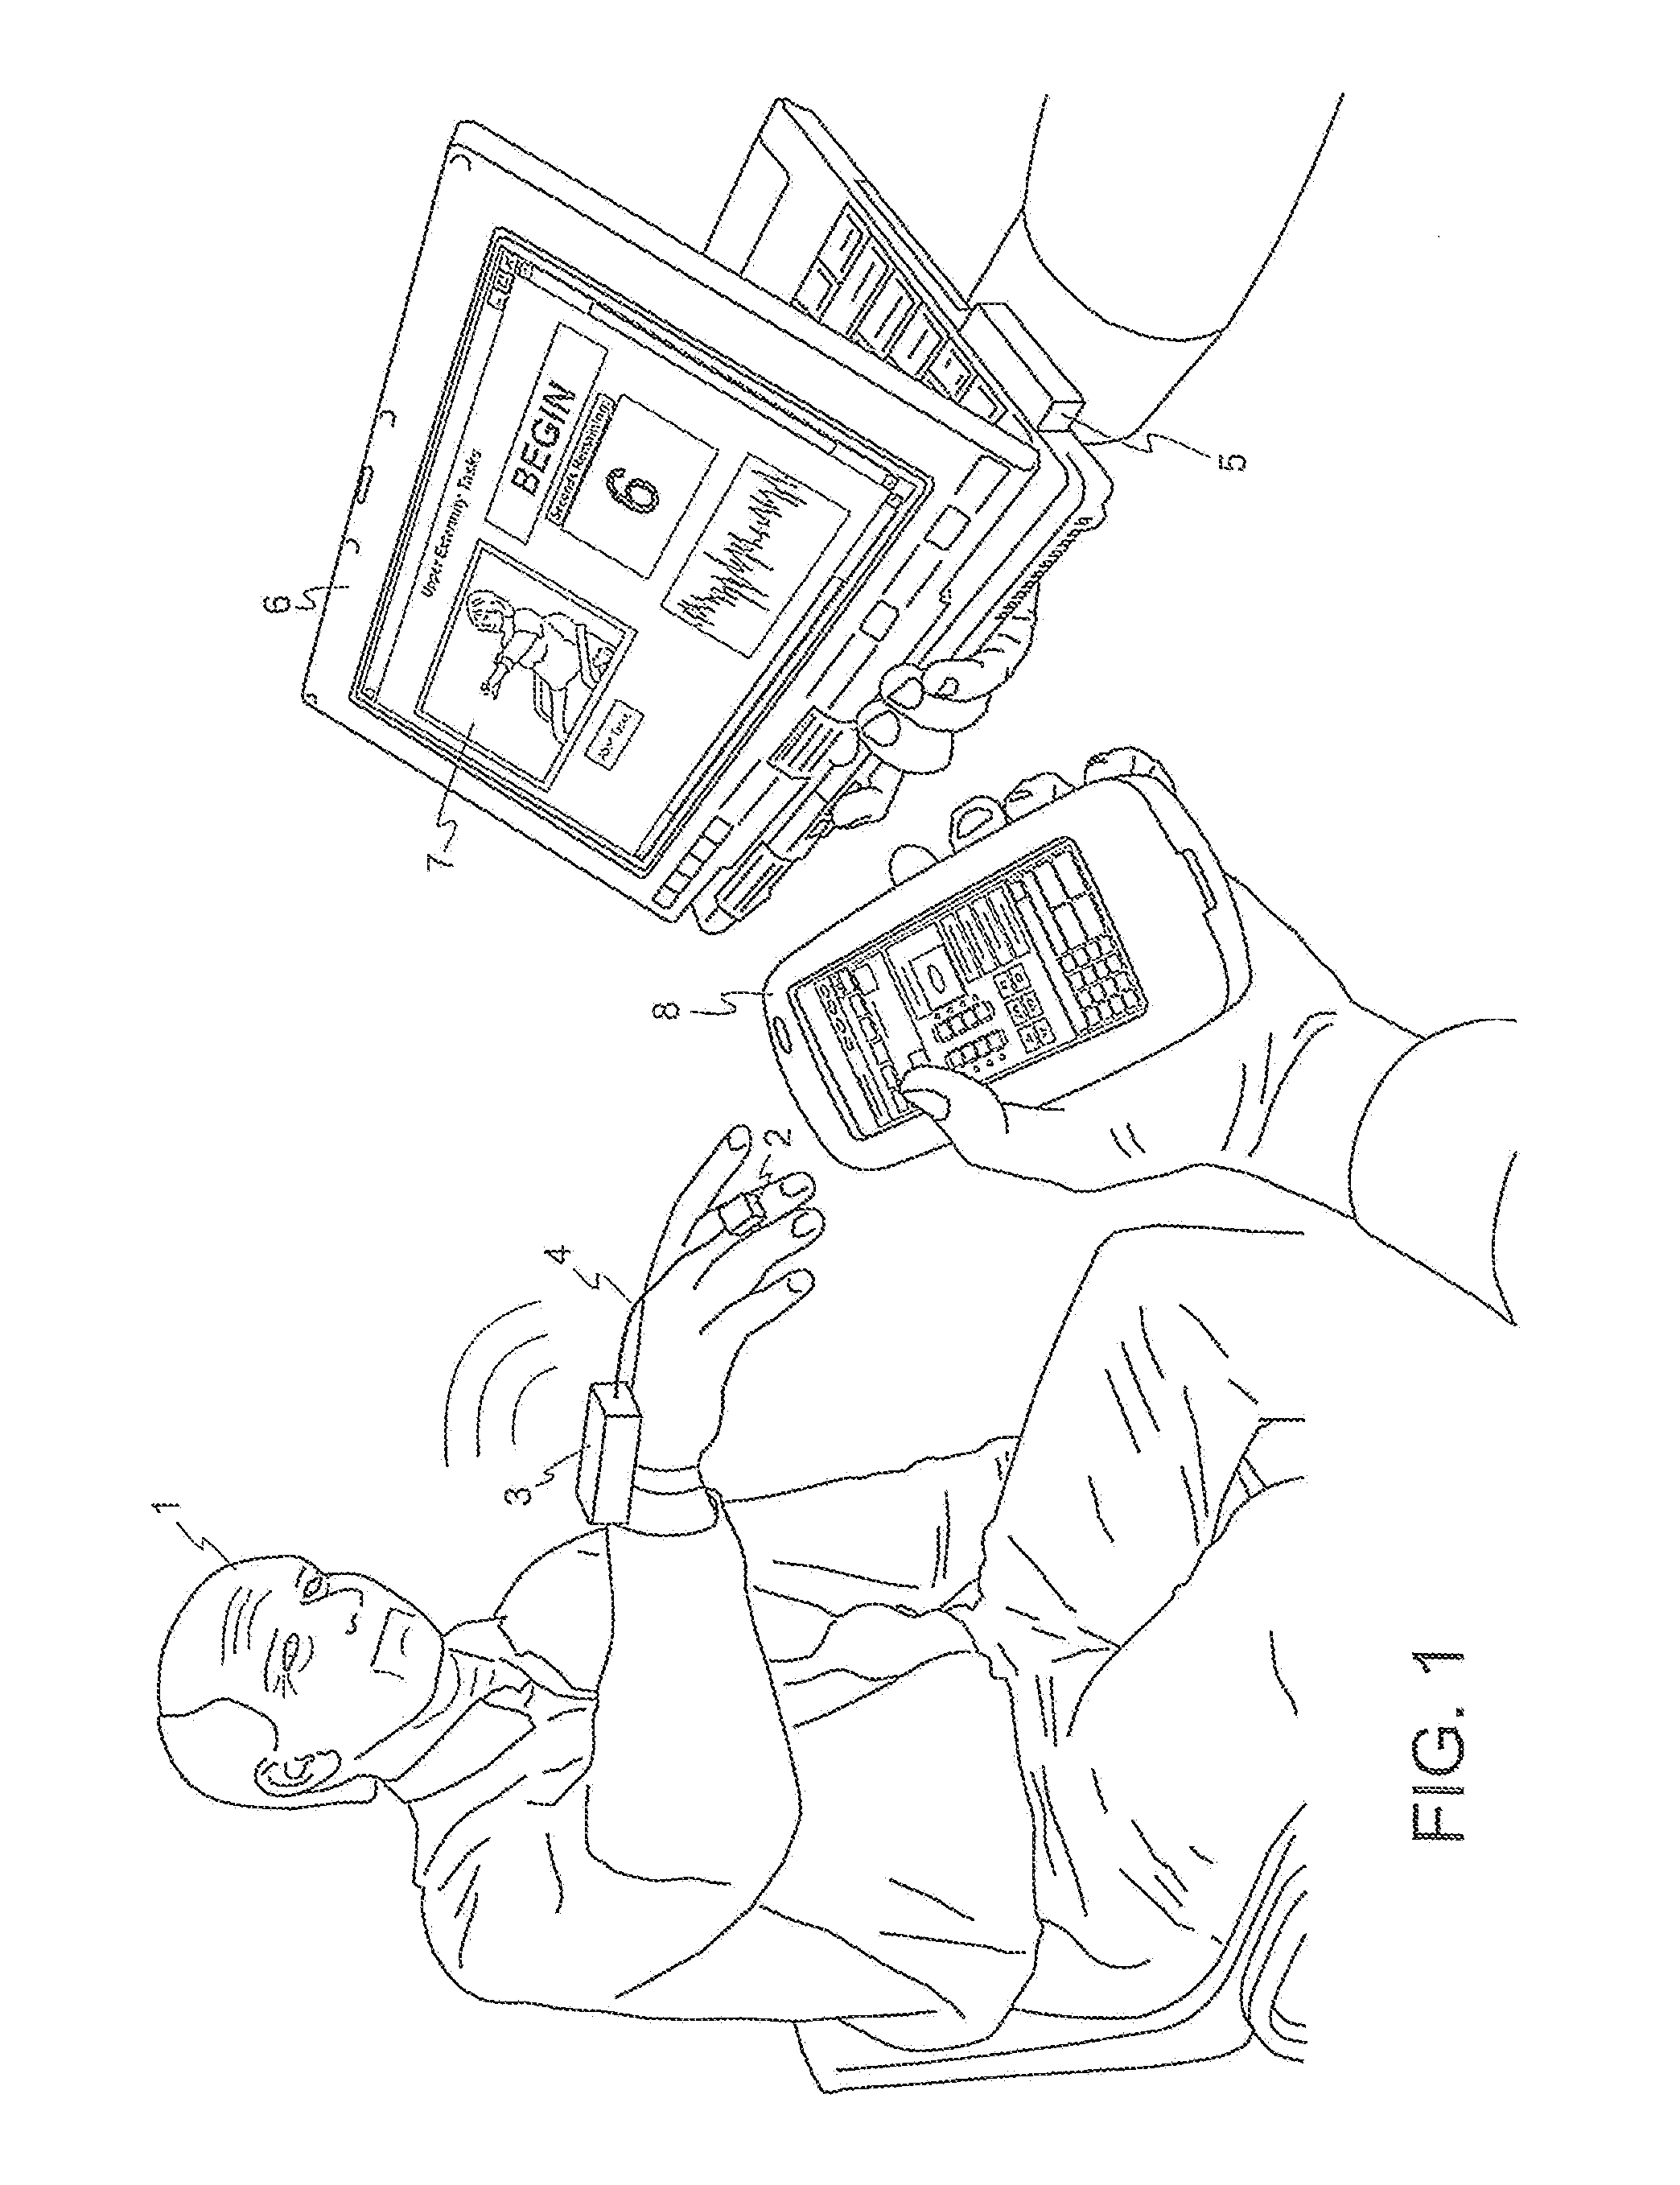 Movement disorder therapy system and methods of tuning remotely, intelligently and/or automatically